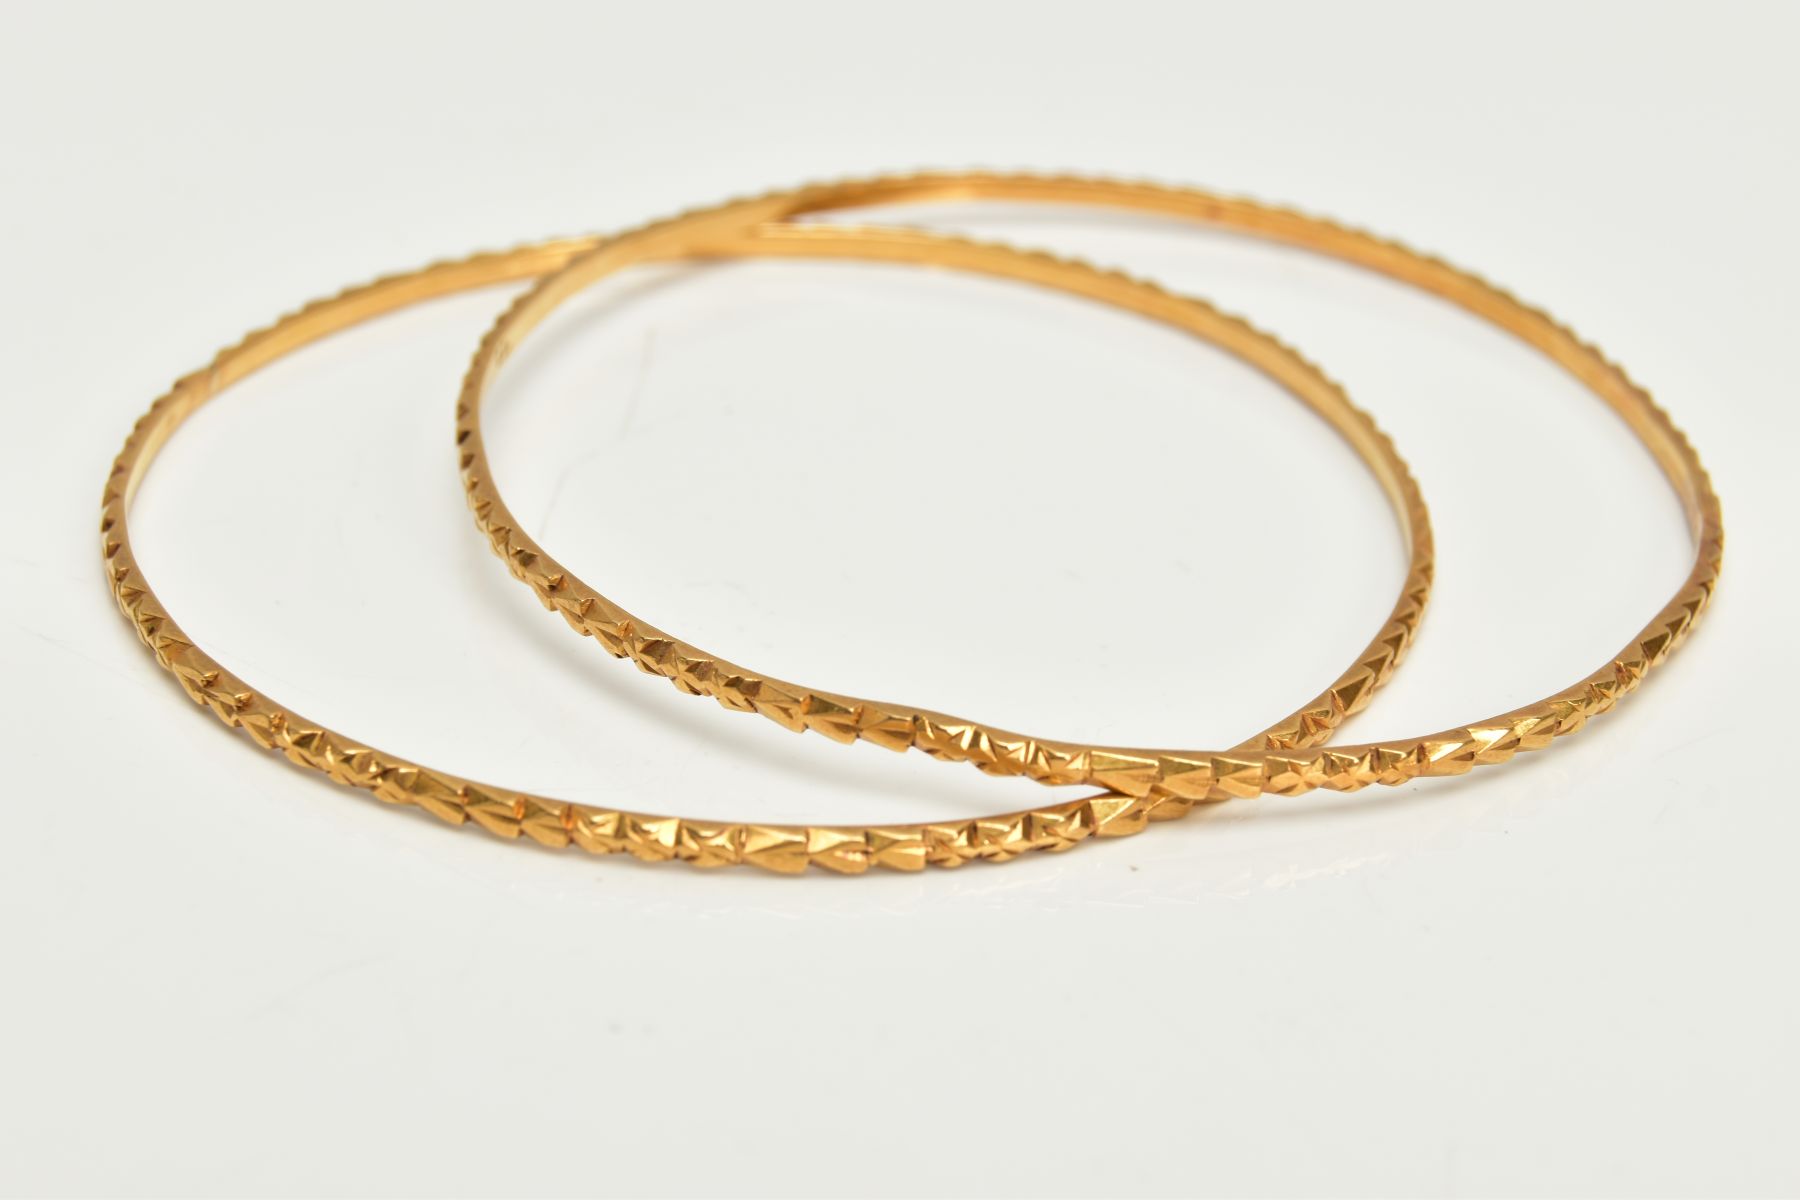 TWO YELLOW METAL BANGLES, each with embossed detail, approximate inner diameter 61mm, stamped 22c,